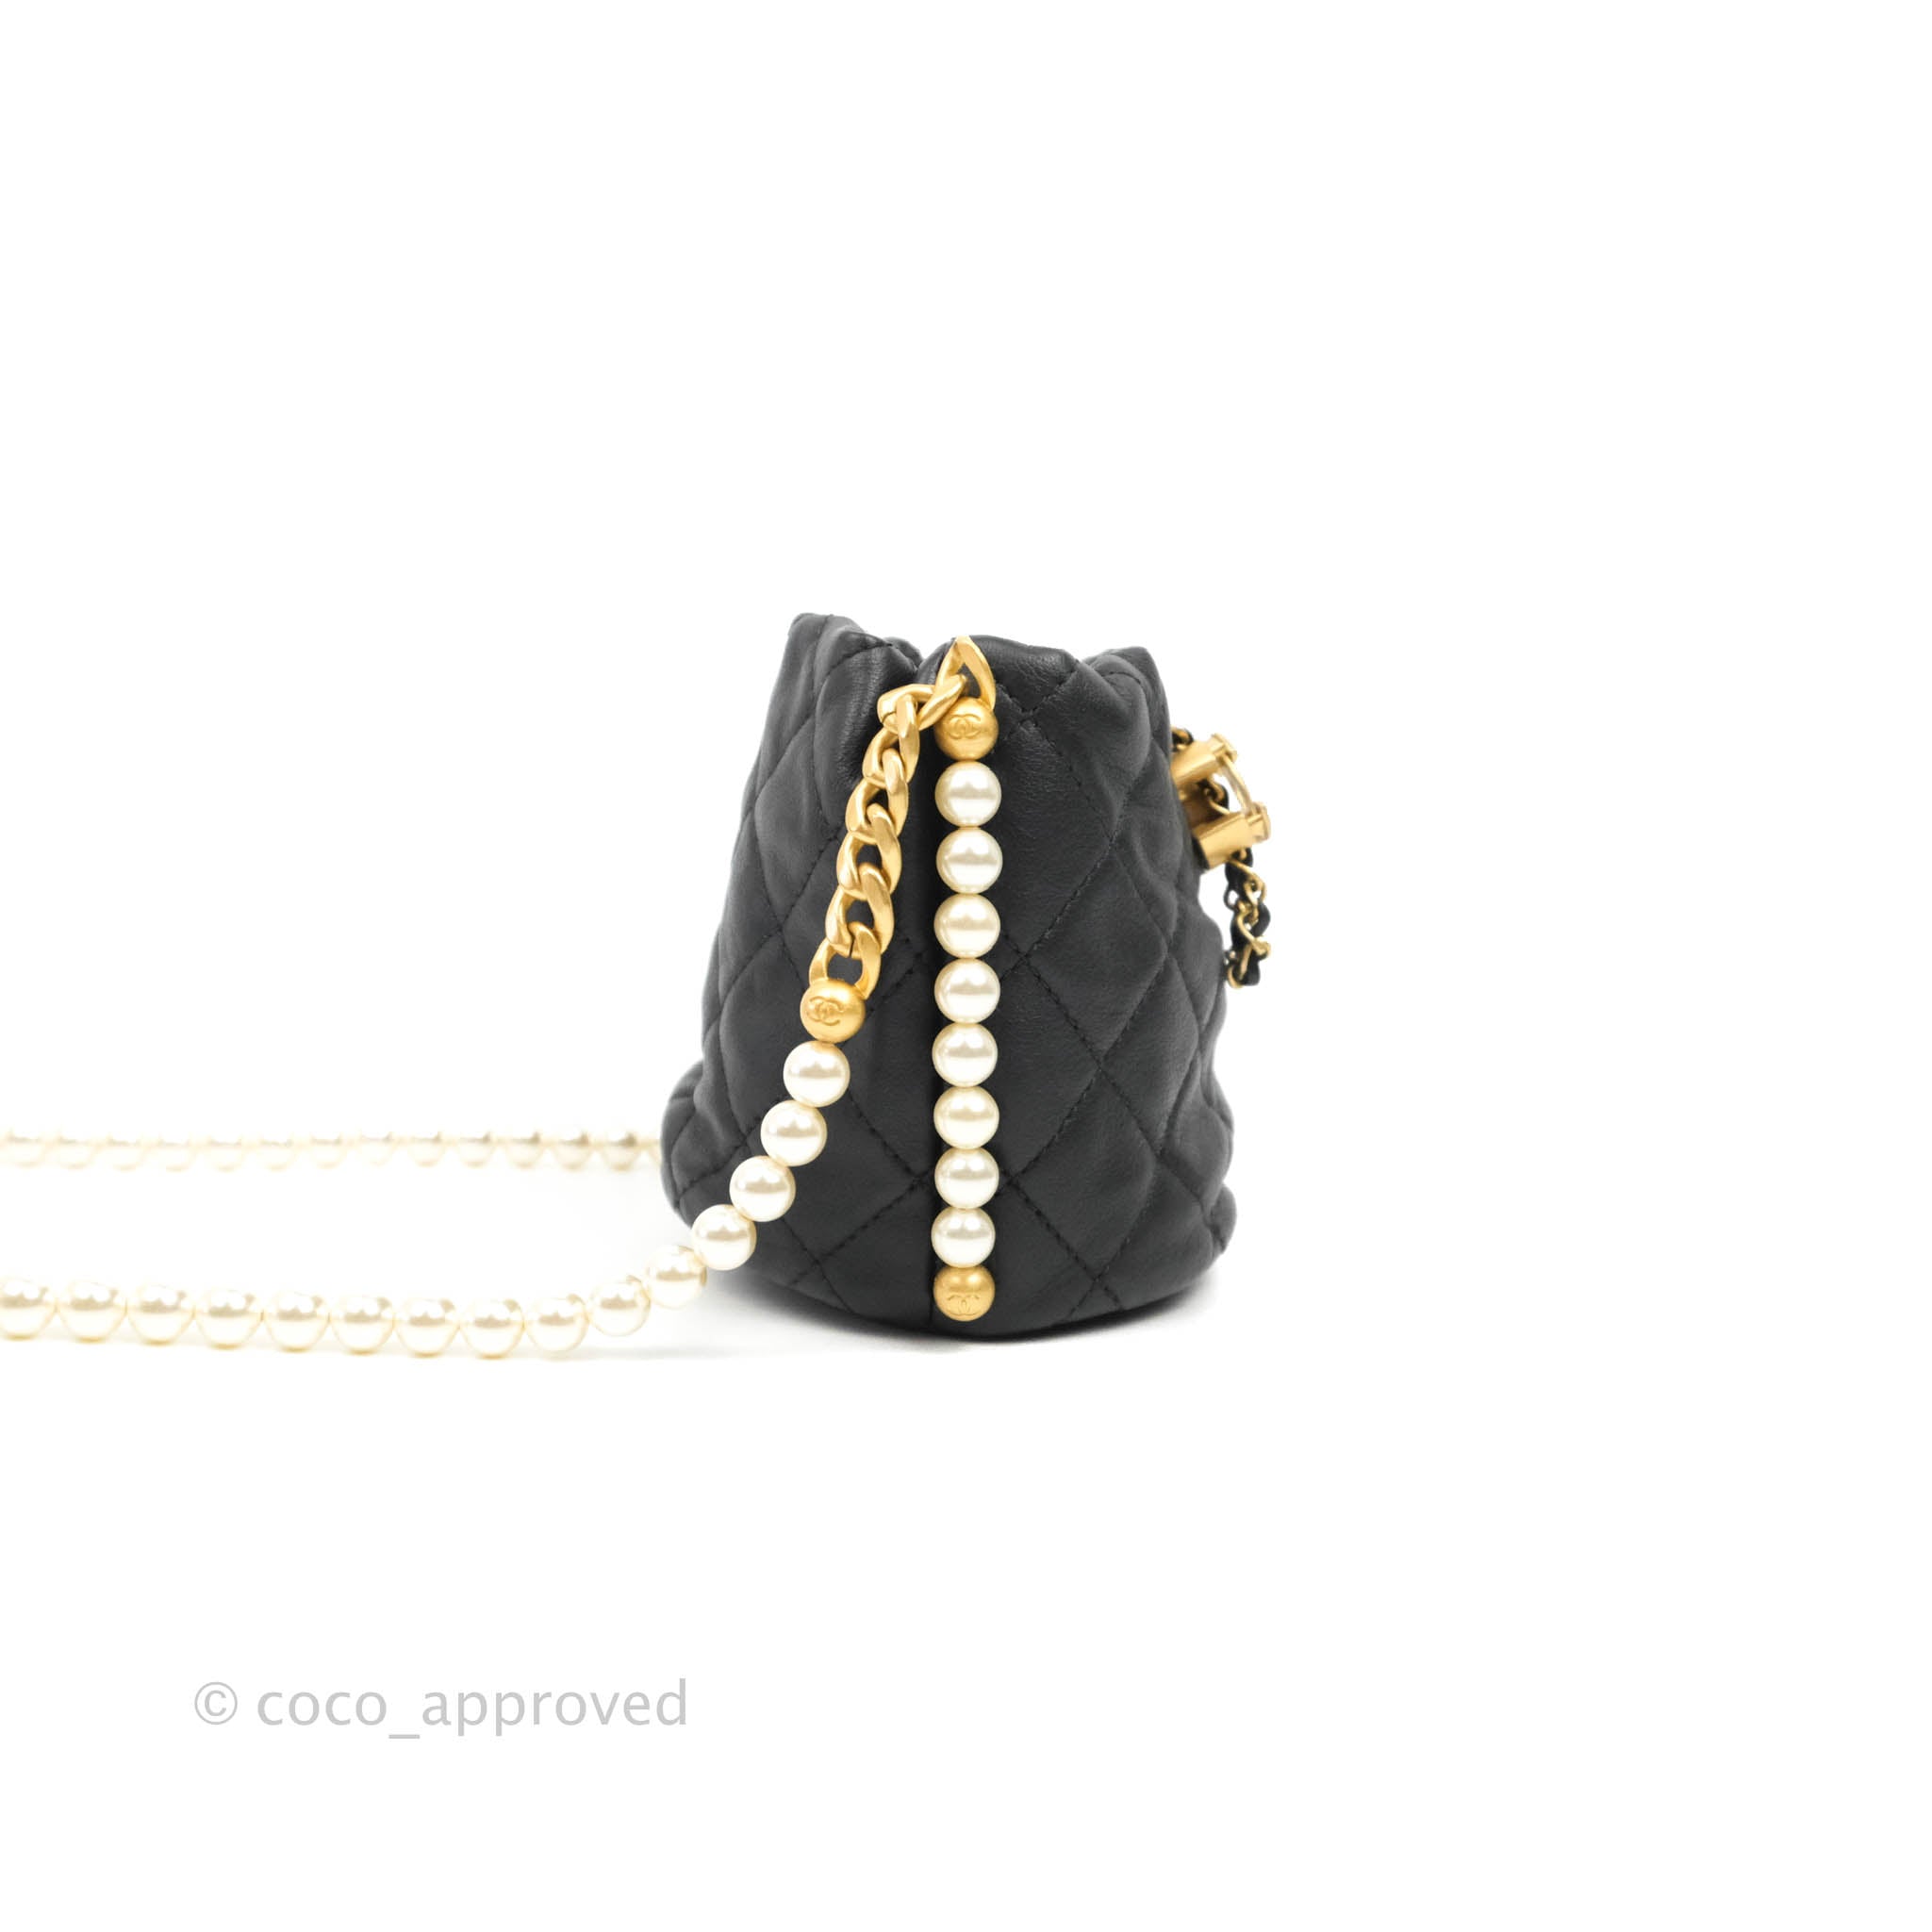 Authentic Chanel Black Mini Bucket Bag with Pearls